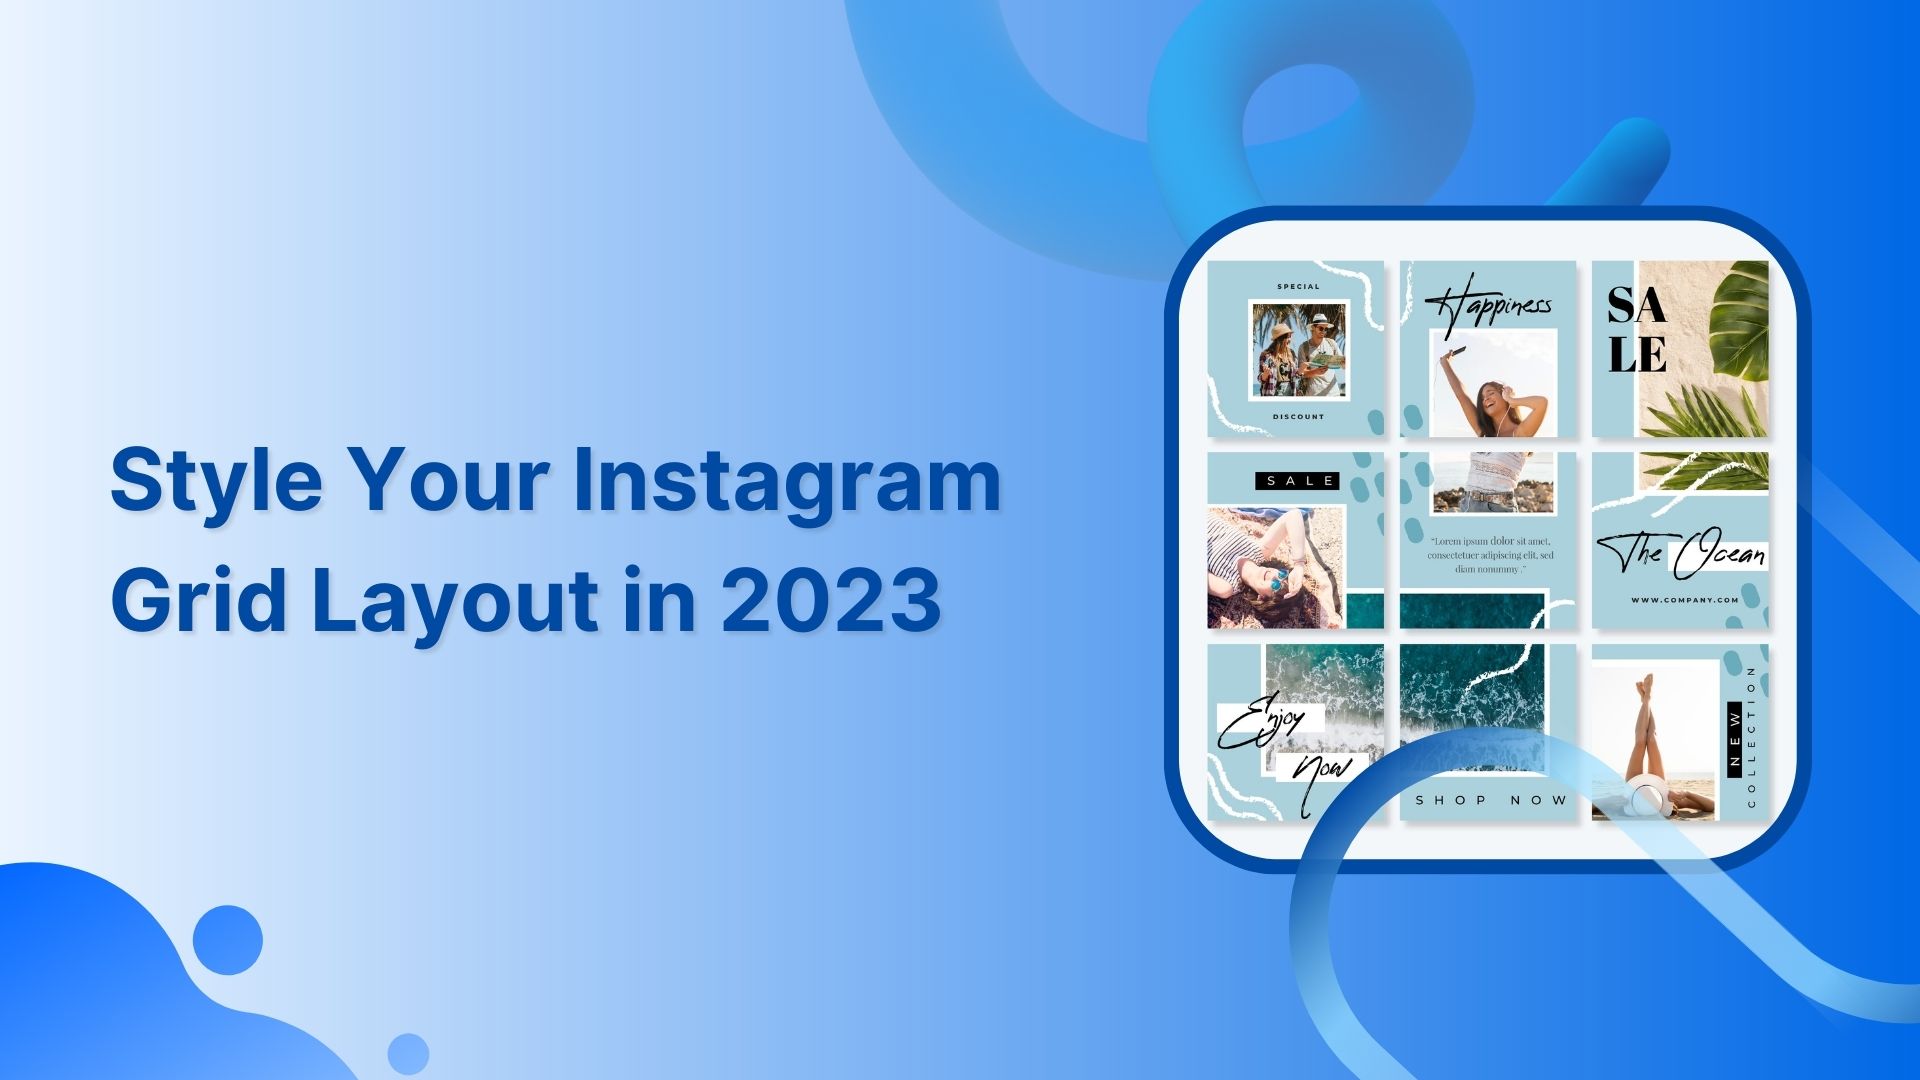 How to Style Your Instagram Grid Layout in 2023